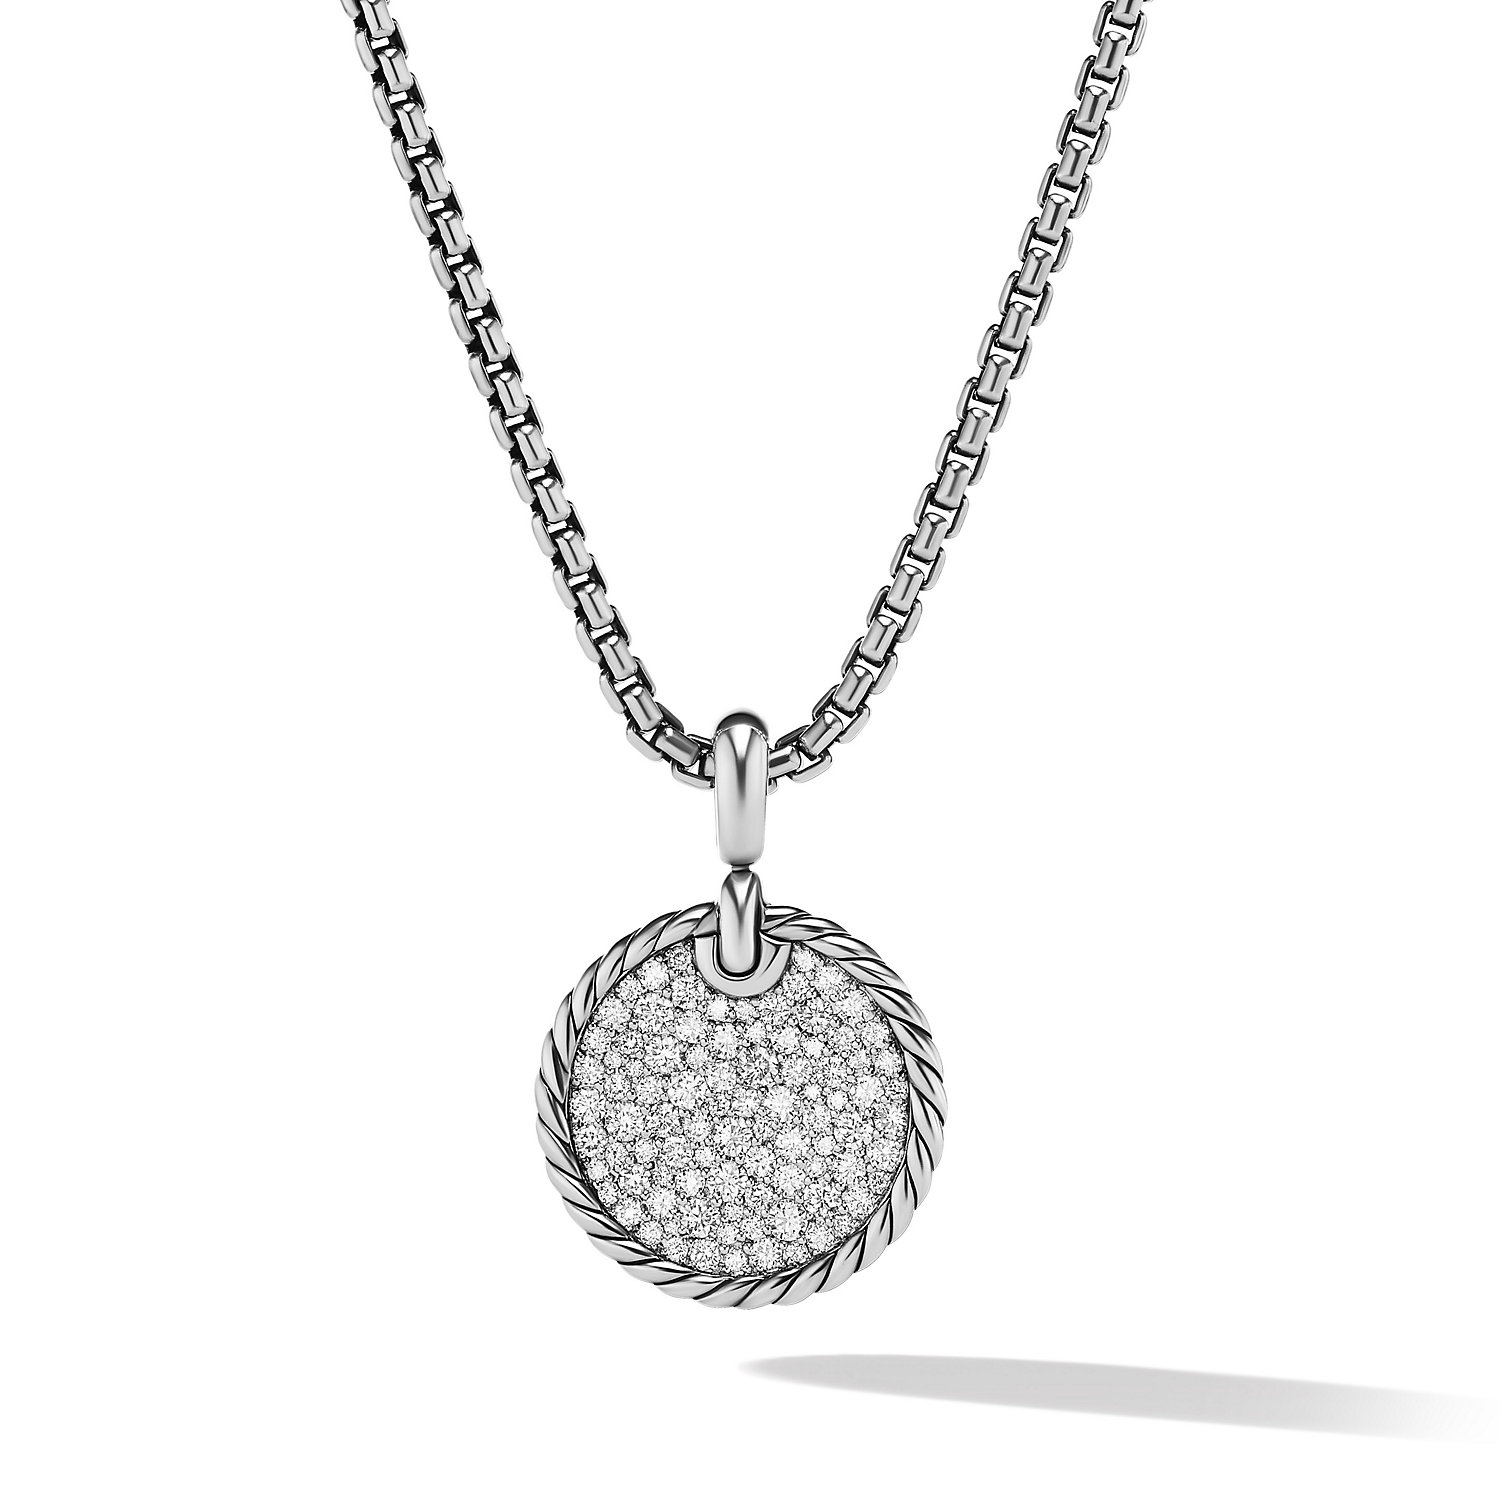 DY Elements® Disc Pendant in Sterling Silver with Diamonds, 21mm